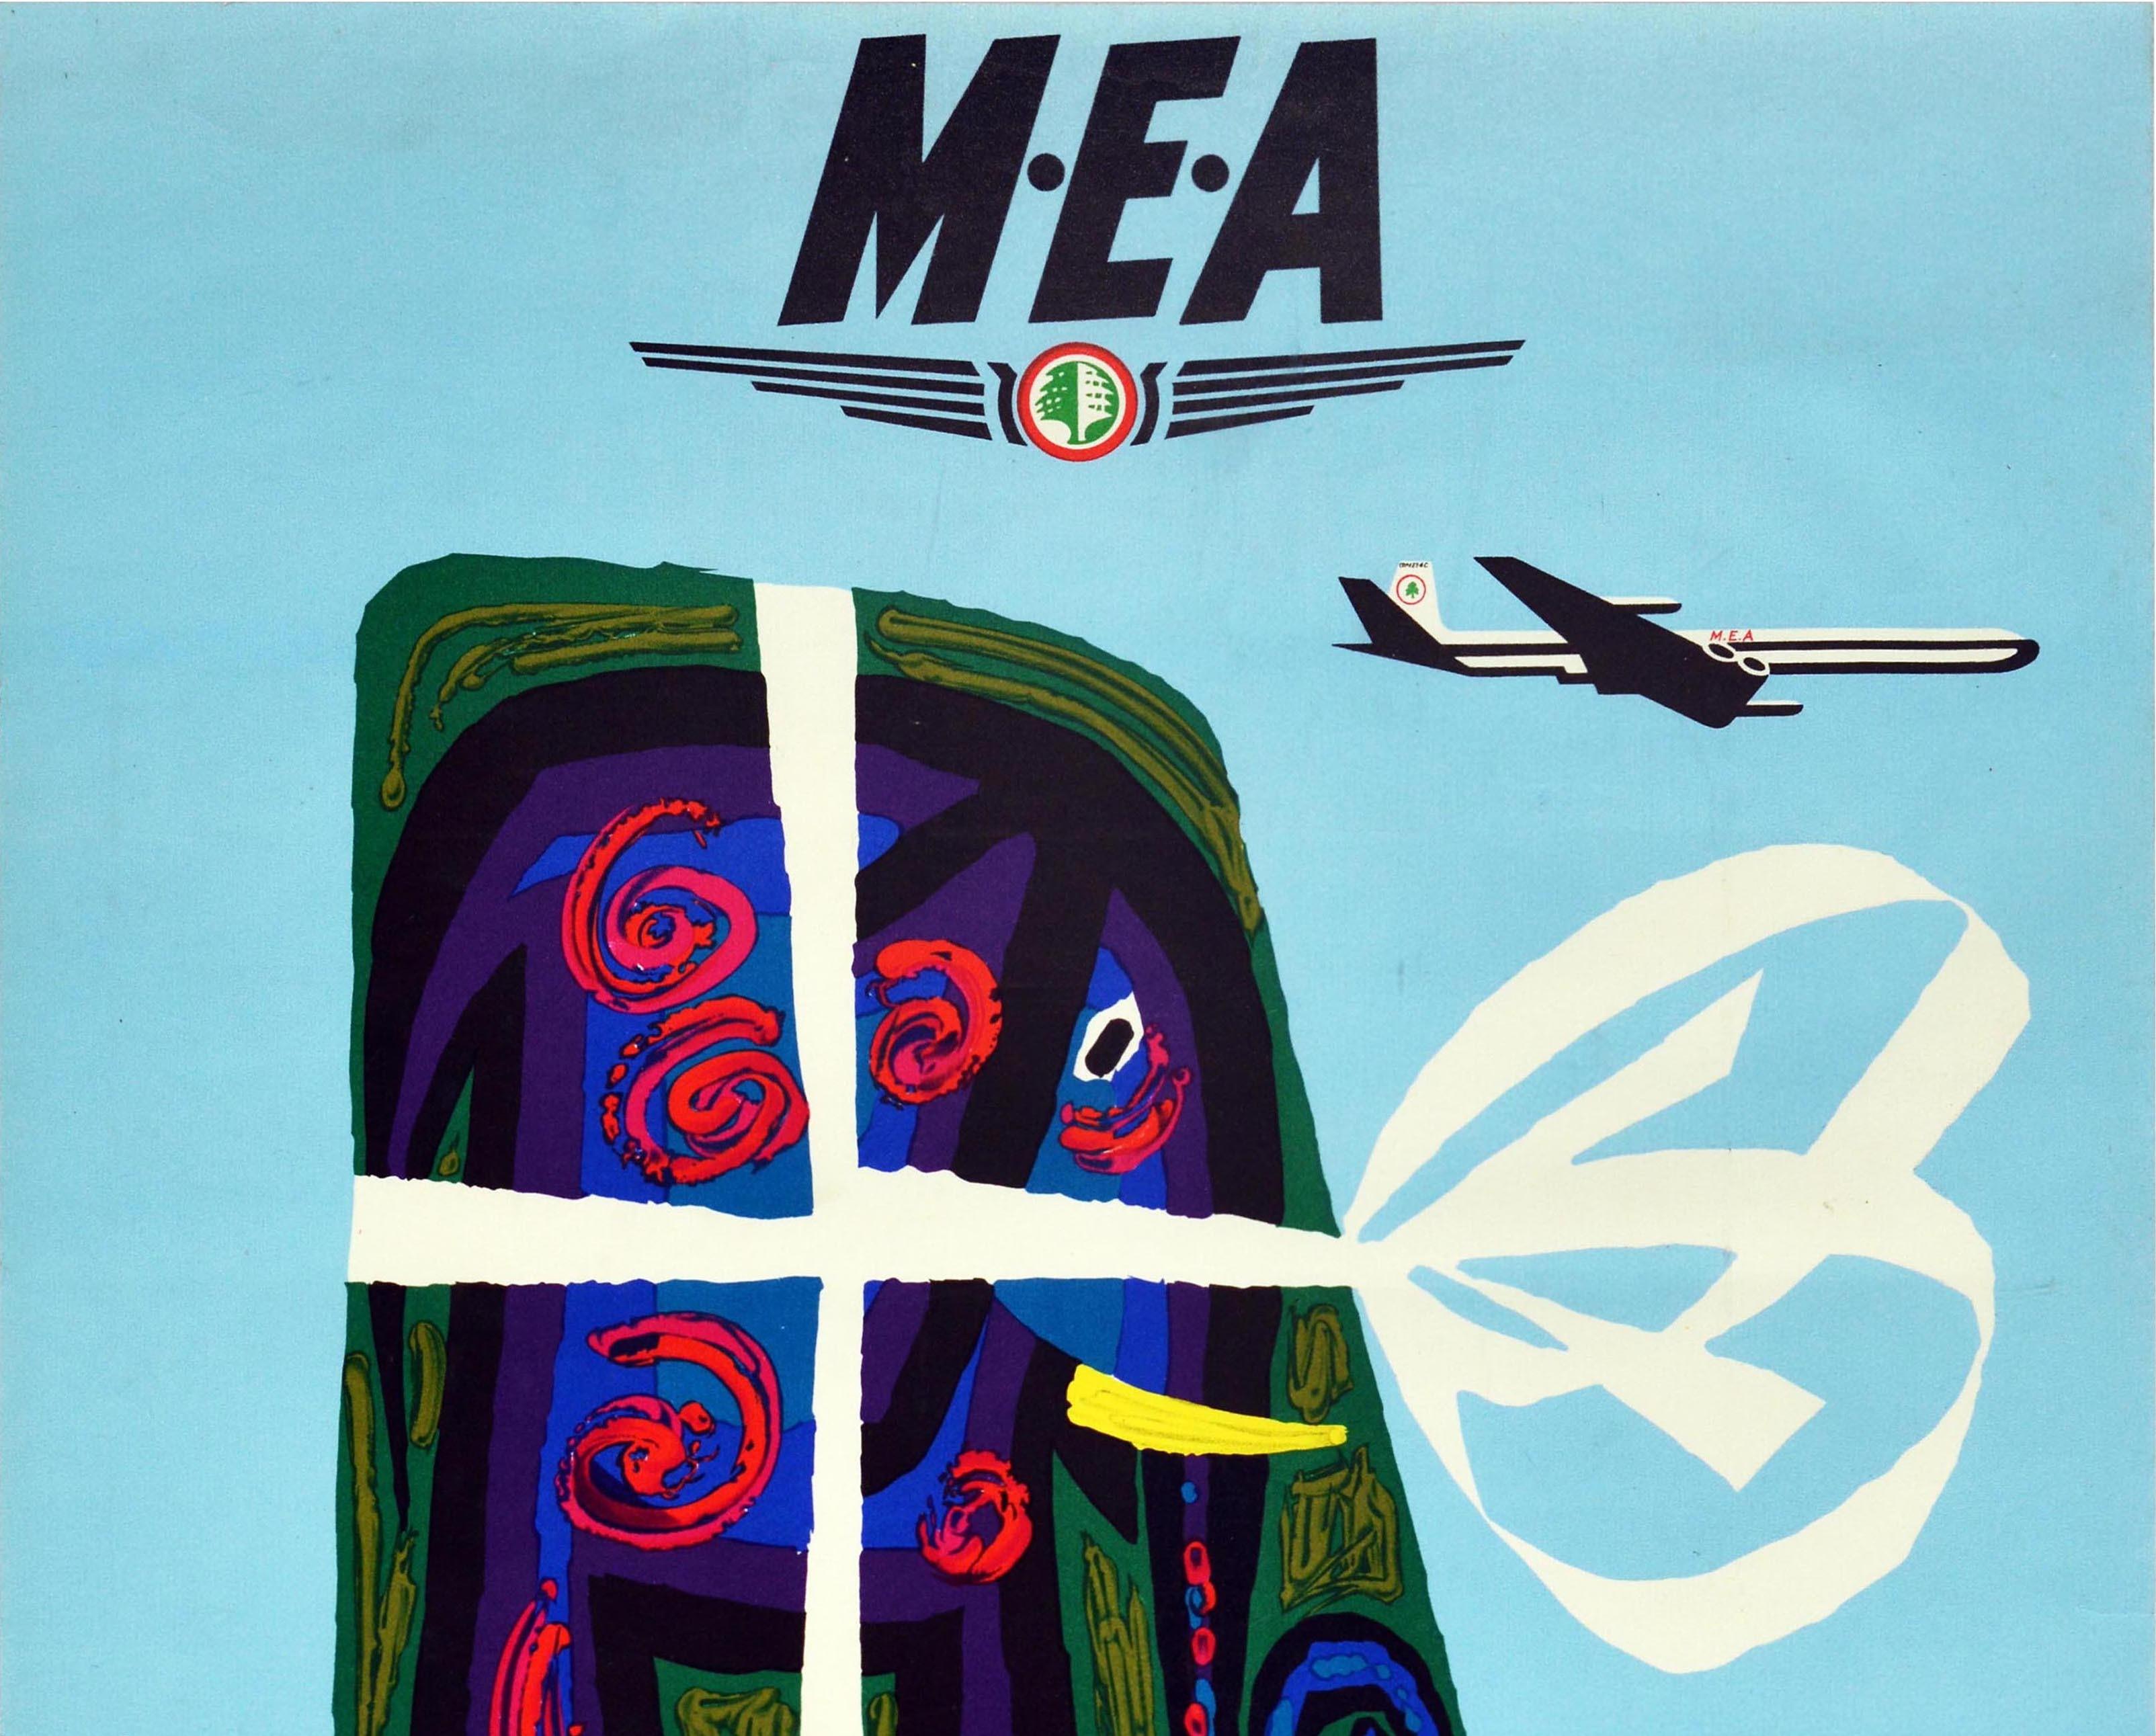 Original Vintage Advertising Poster Middle East Airlines MEA Cargo Plane 850km/h - Print by Jacques Auriac